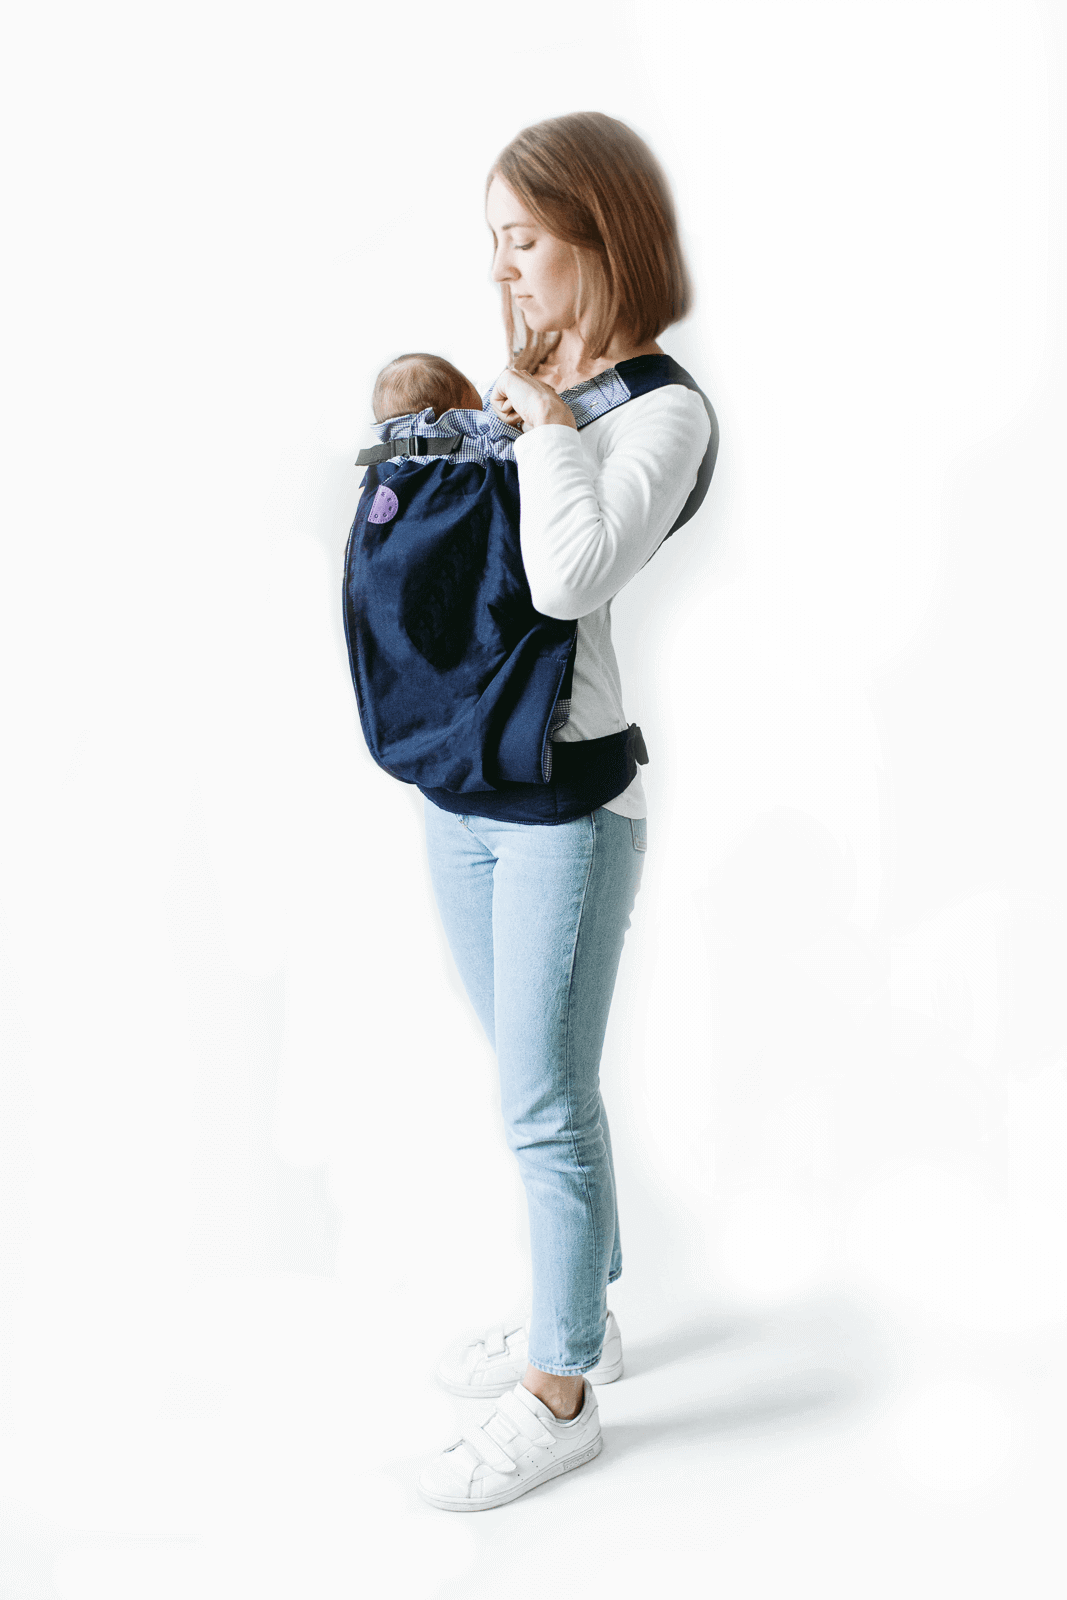 The Weego ORIGINAL Baby Carrier